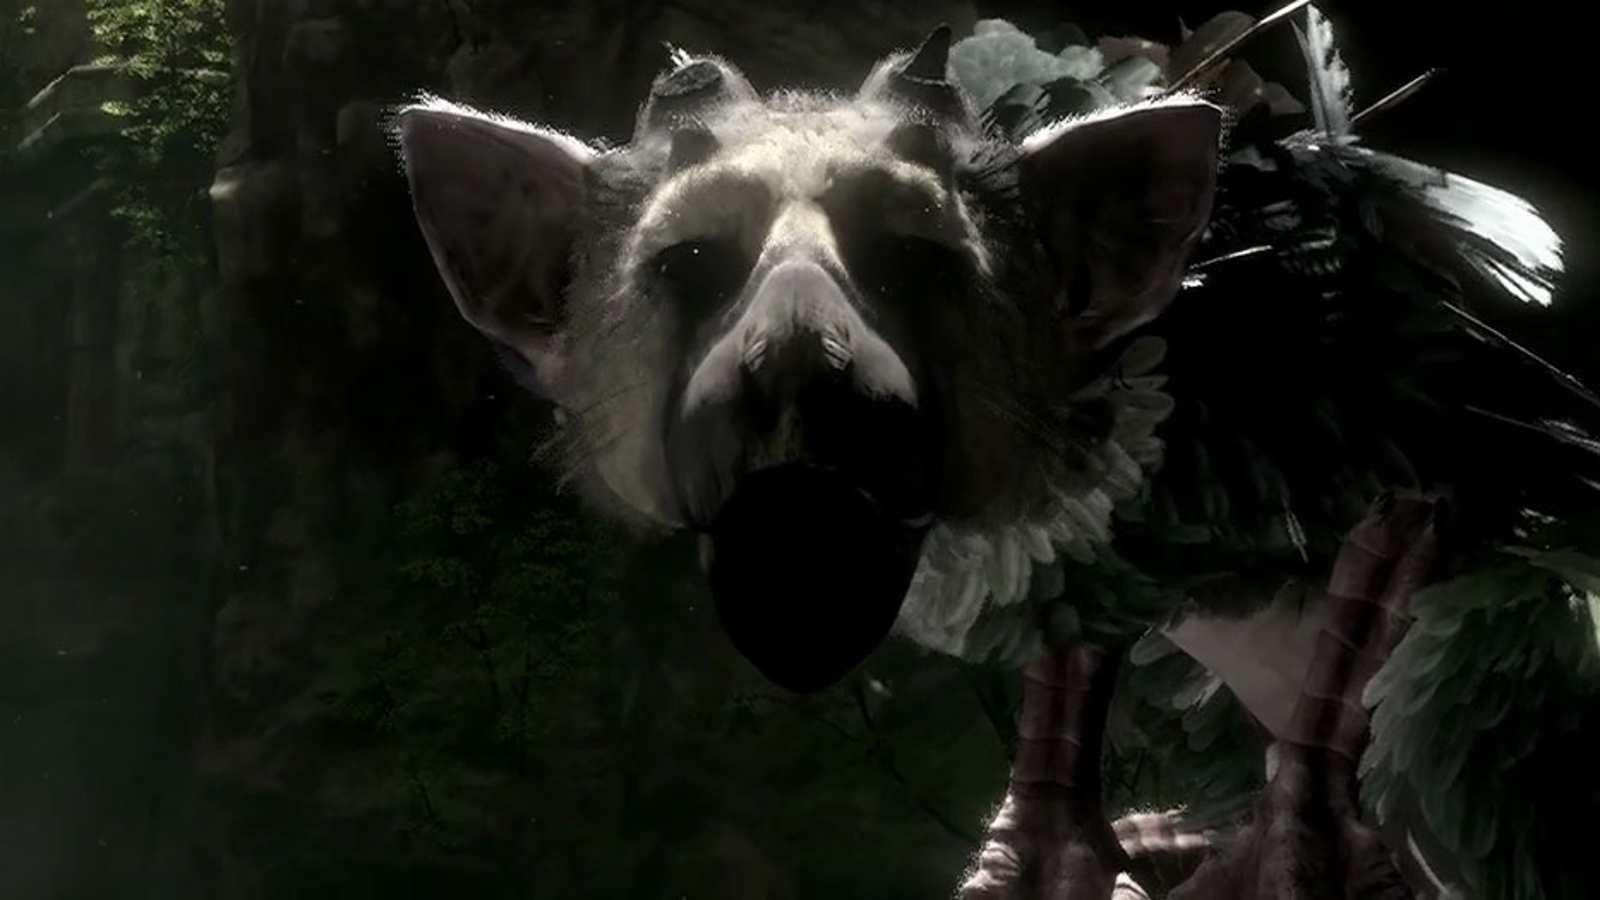 The Last Guardian lives, will hit PlayStation 4 next year【E3 2015】